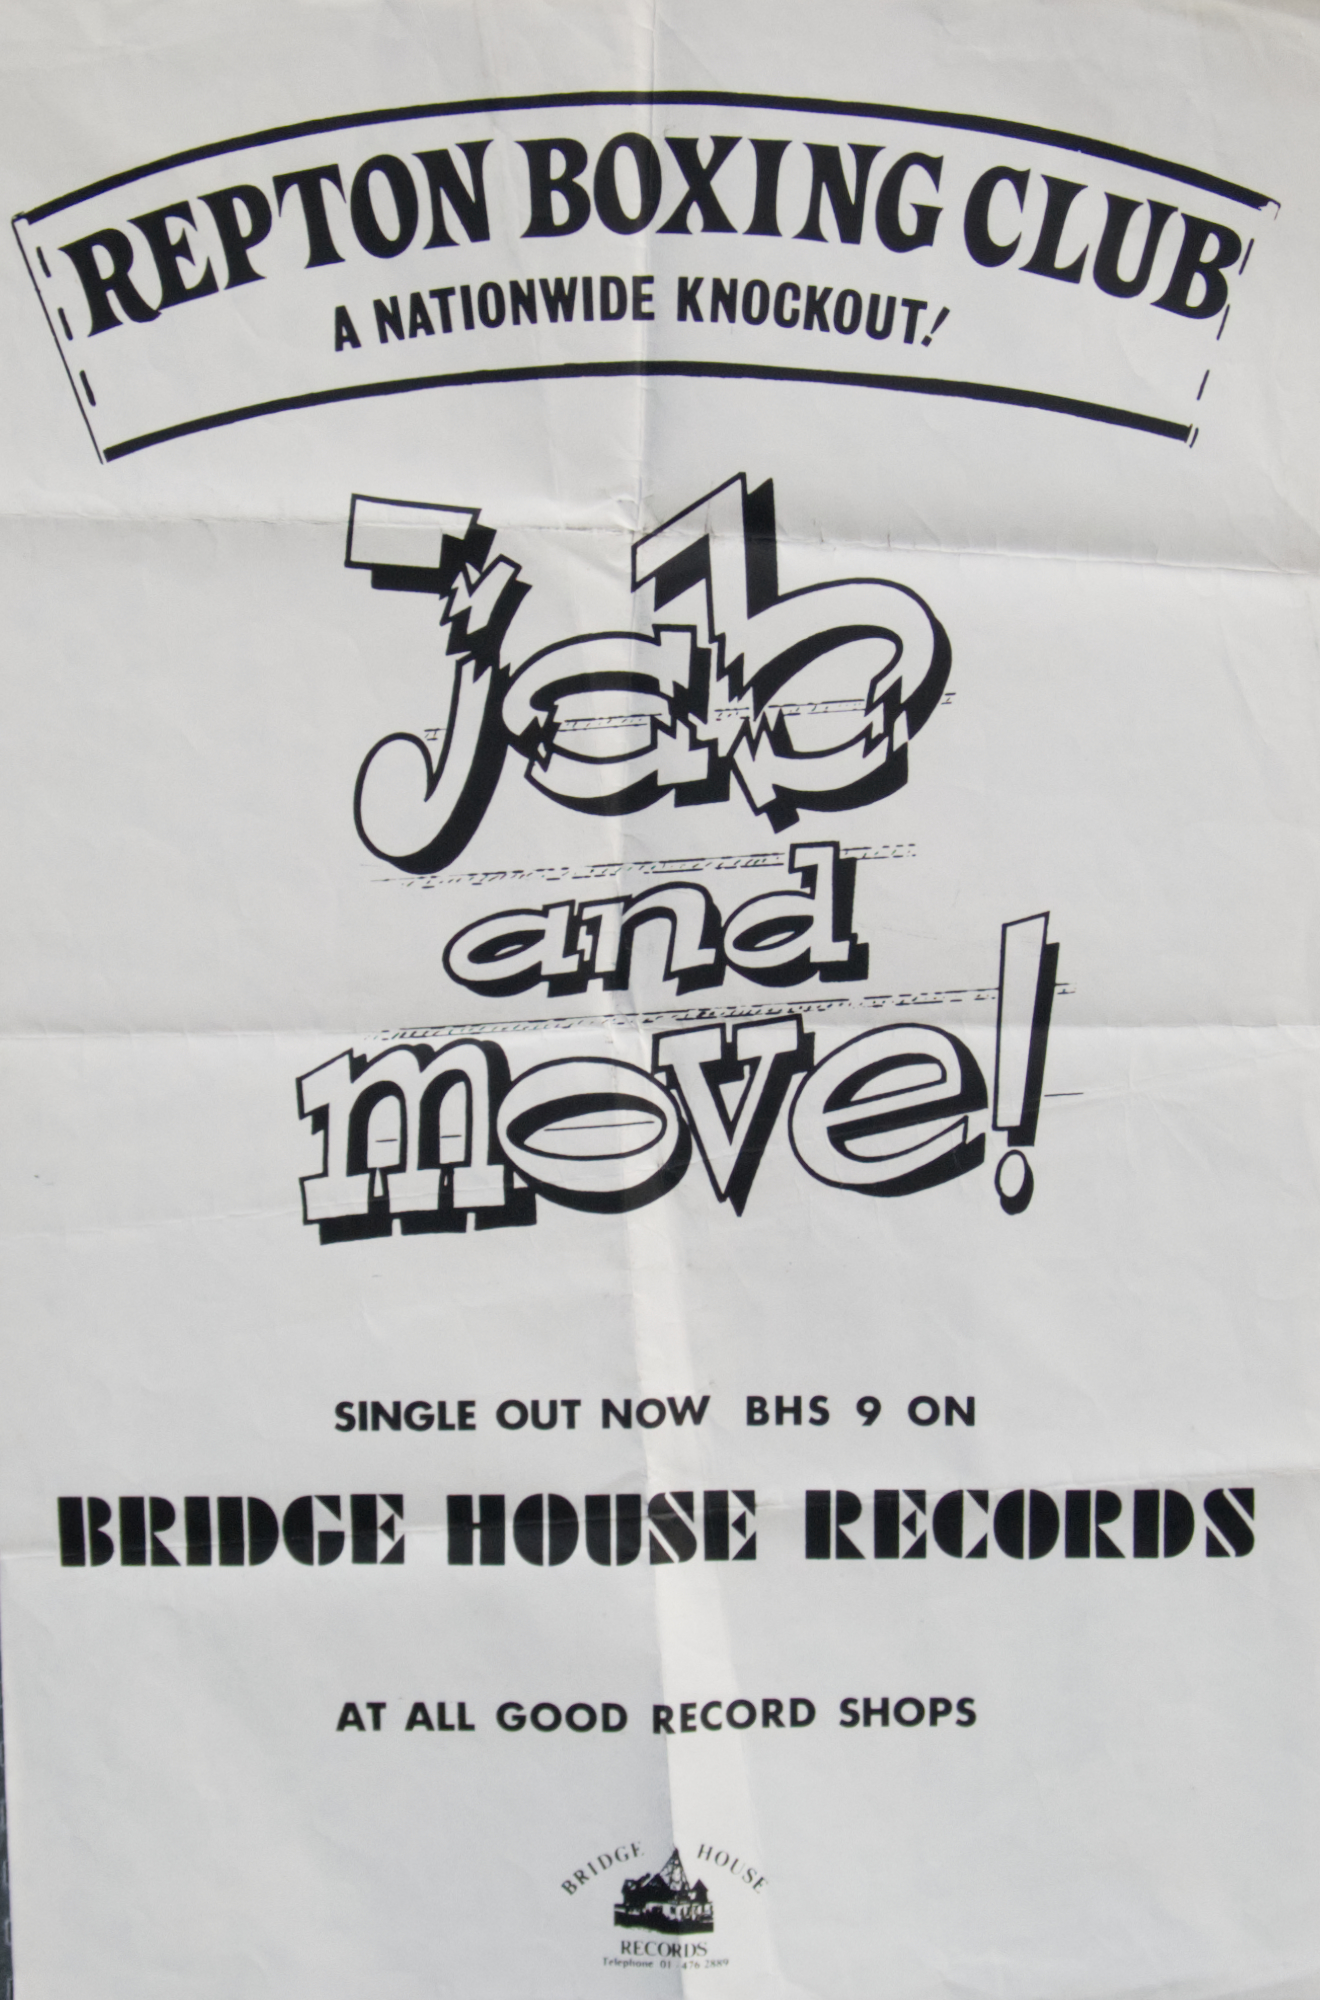 Bridge House Records poster for Jab and Move single